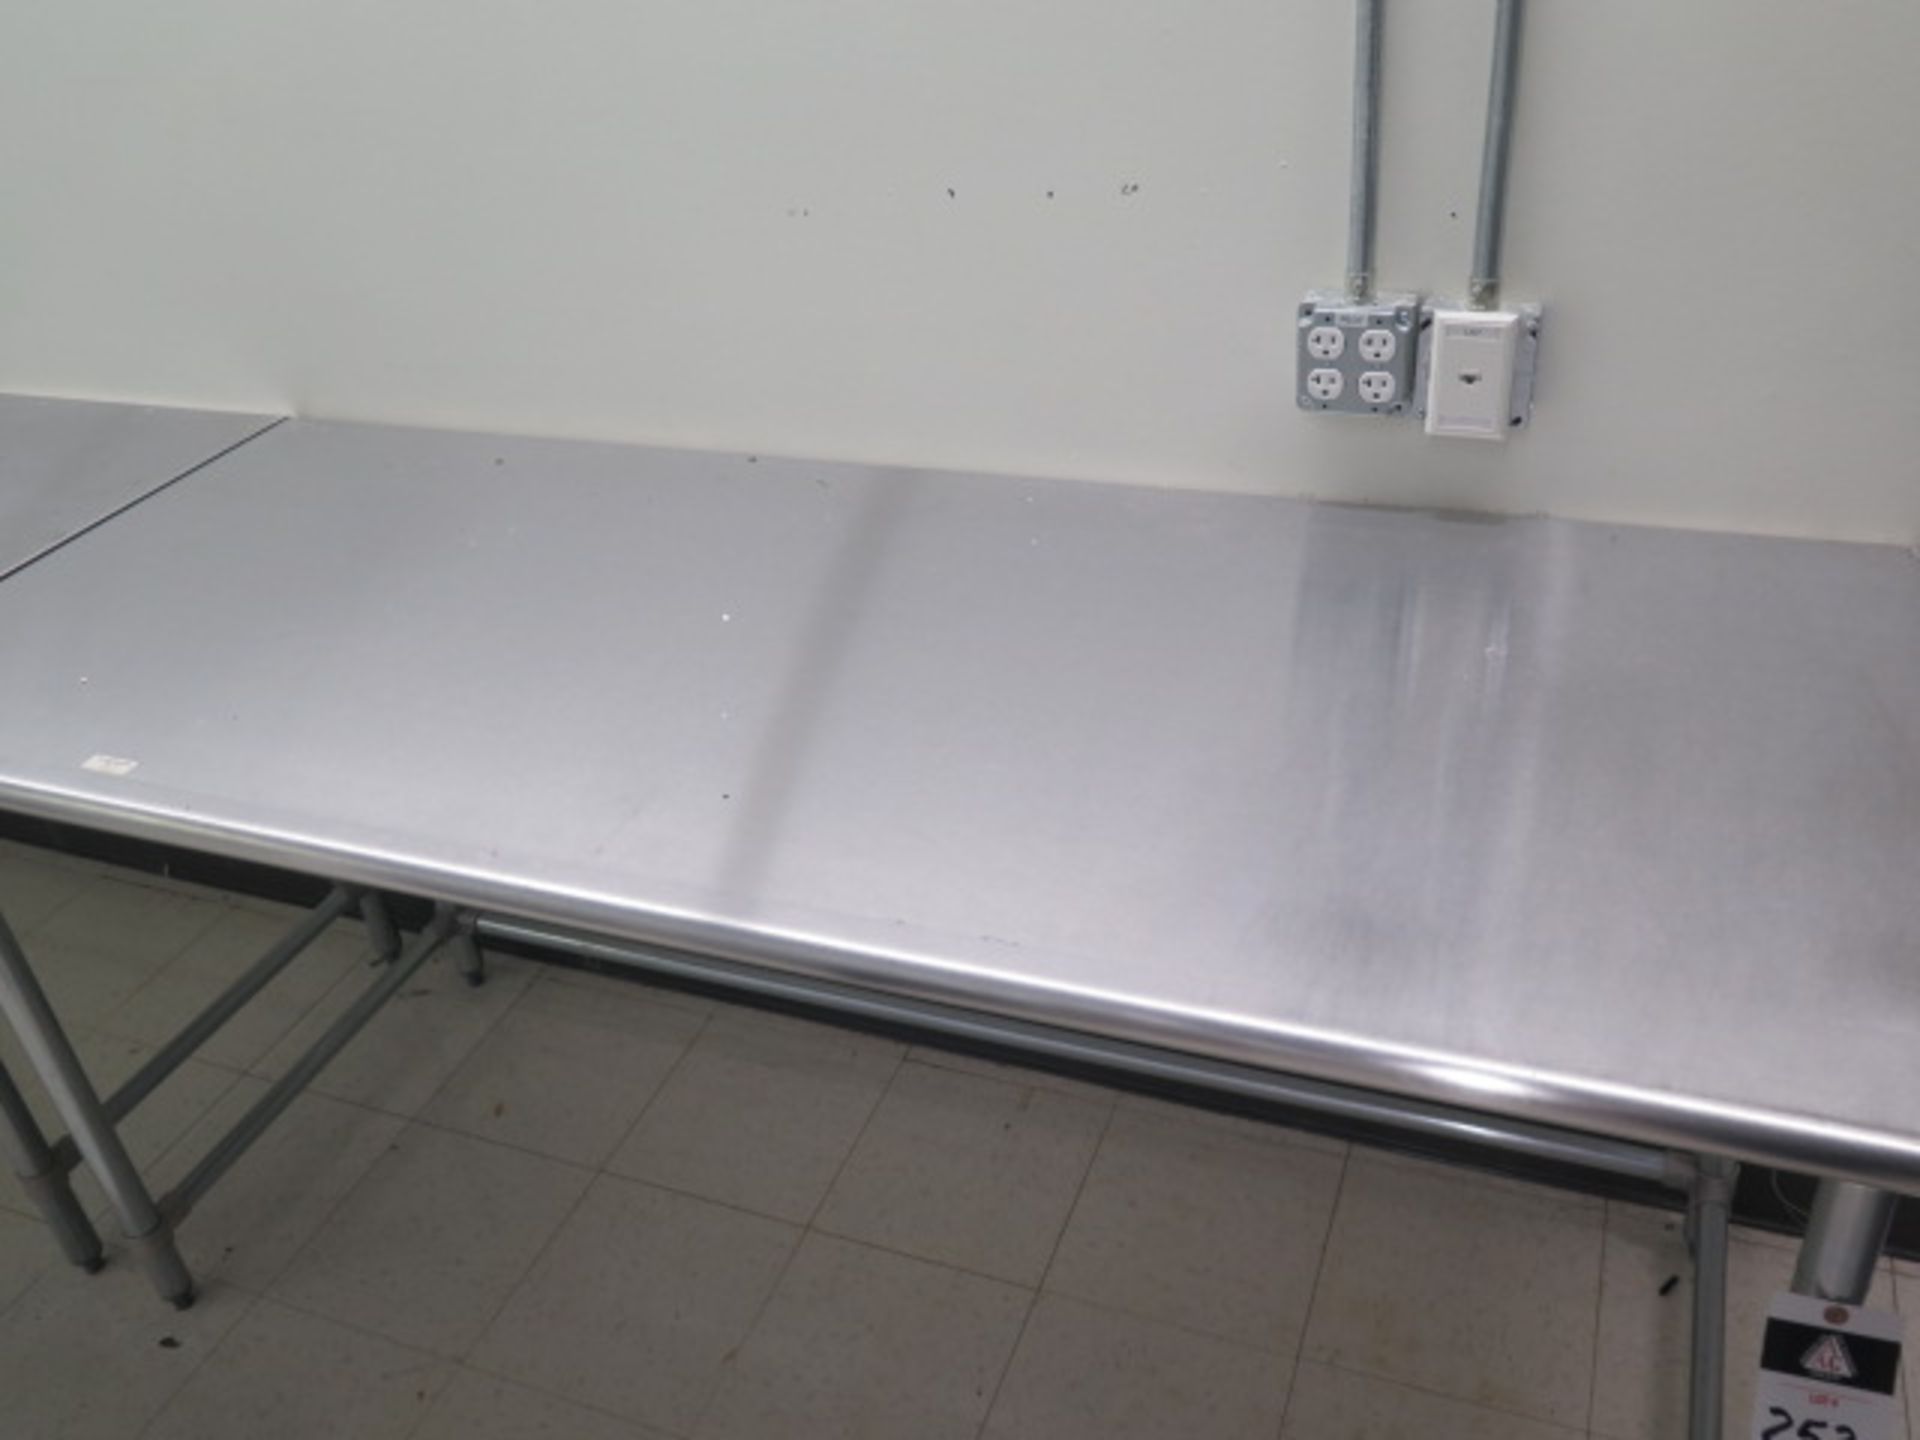 30" x 72" Stainless Steel Lab Benches (3) (SOLD AS-IS - NO WARRANTY) - Image 3 of 5